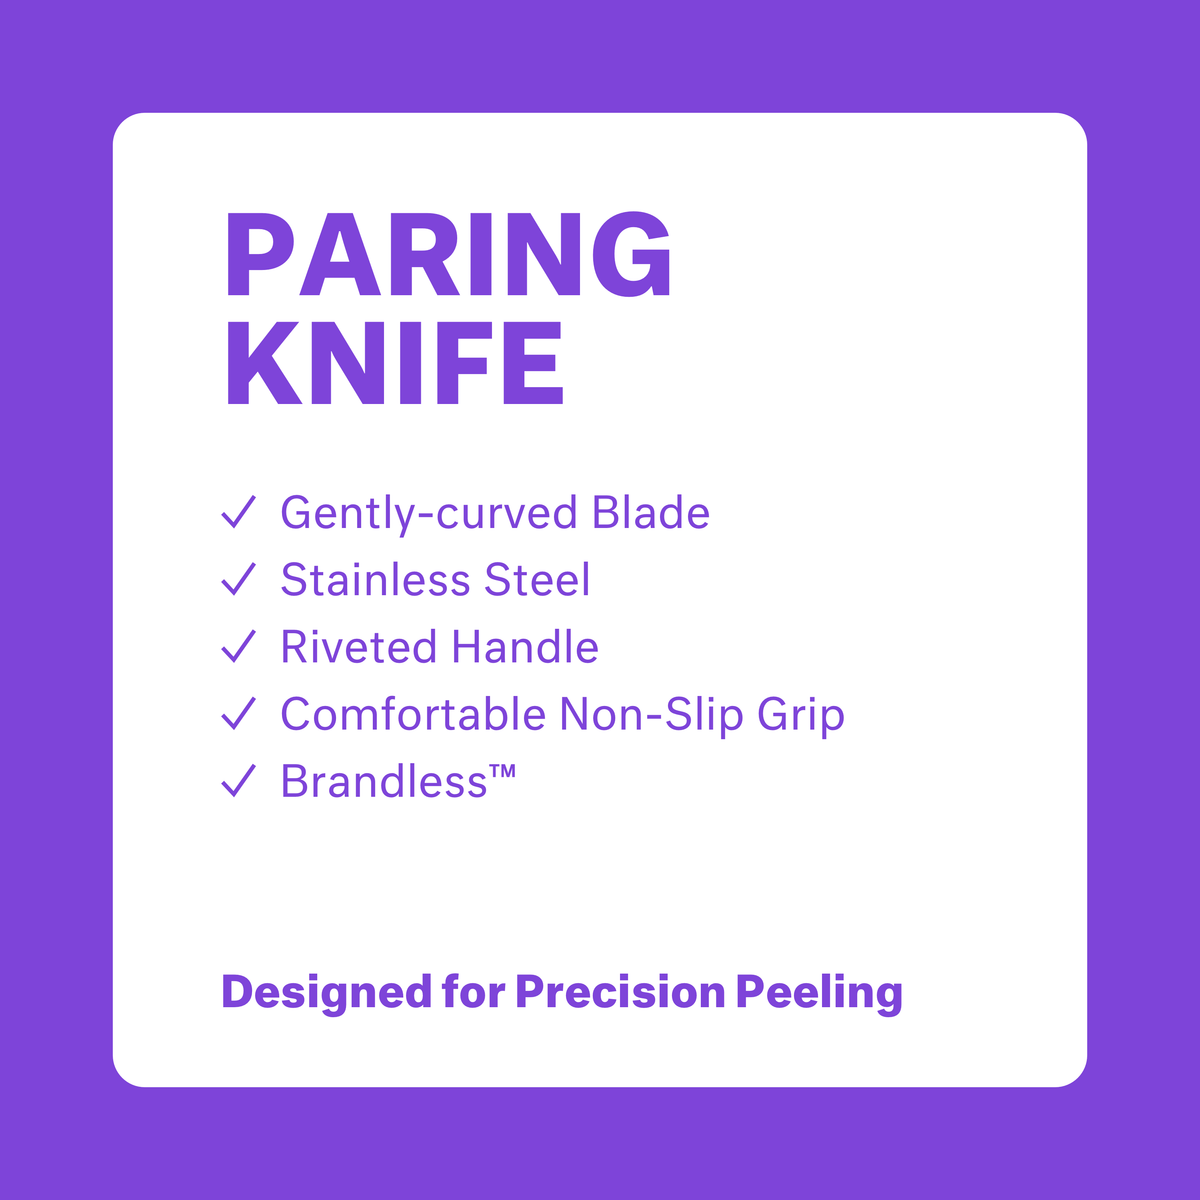 Paring Knife. Gently curved blade, stainless steel, riveted handle, comfortable non-slip grip, Brandless